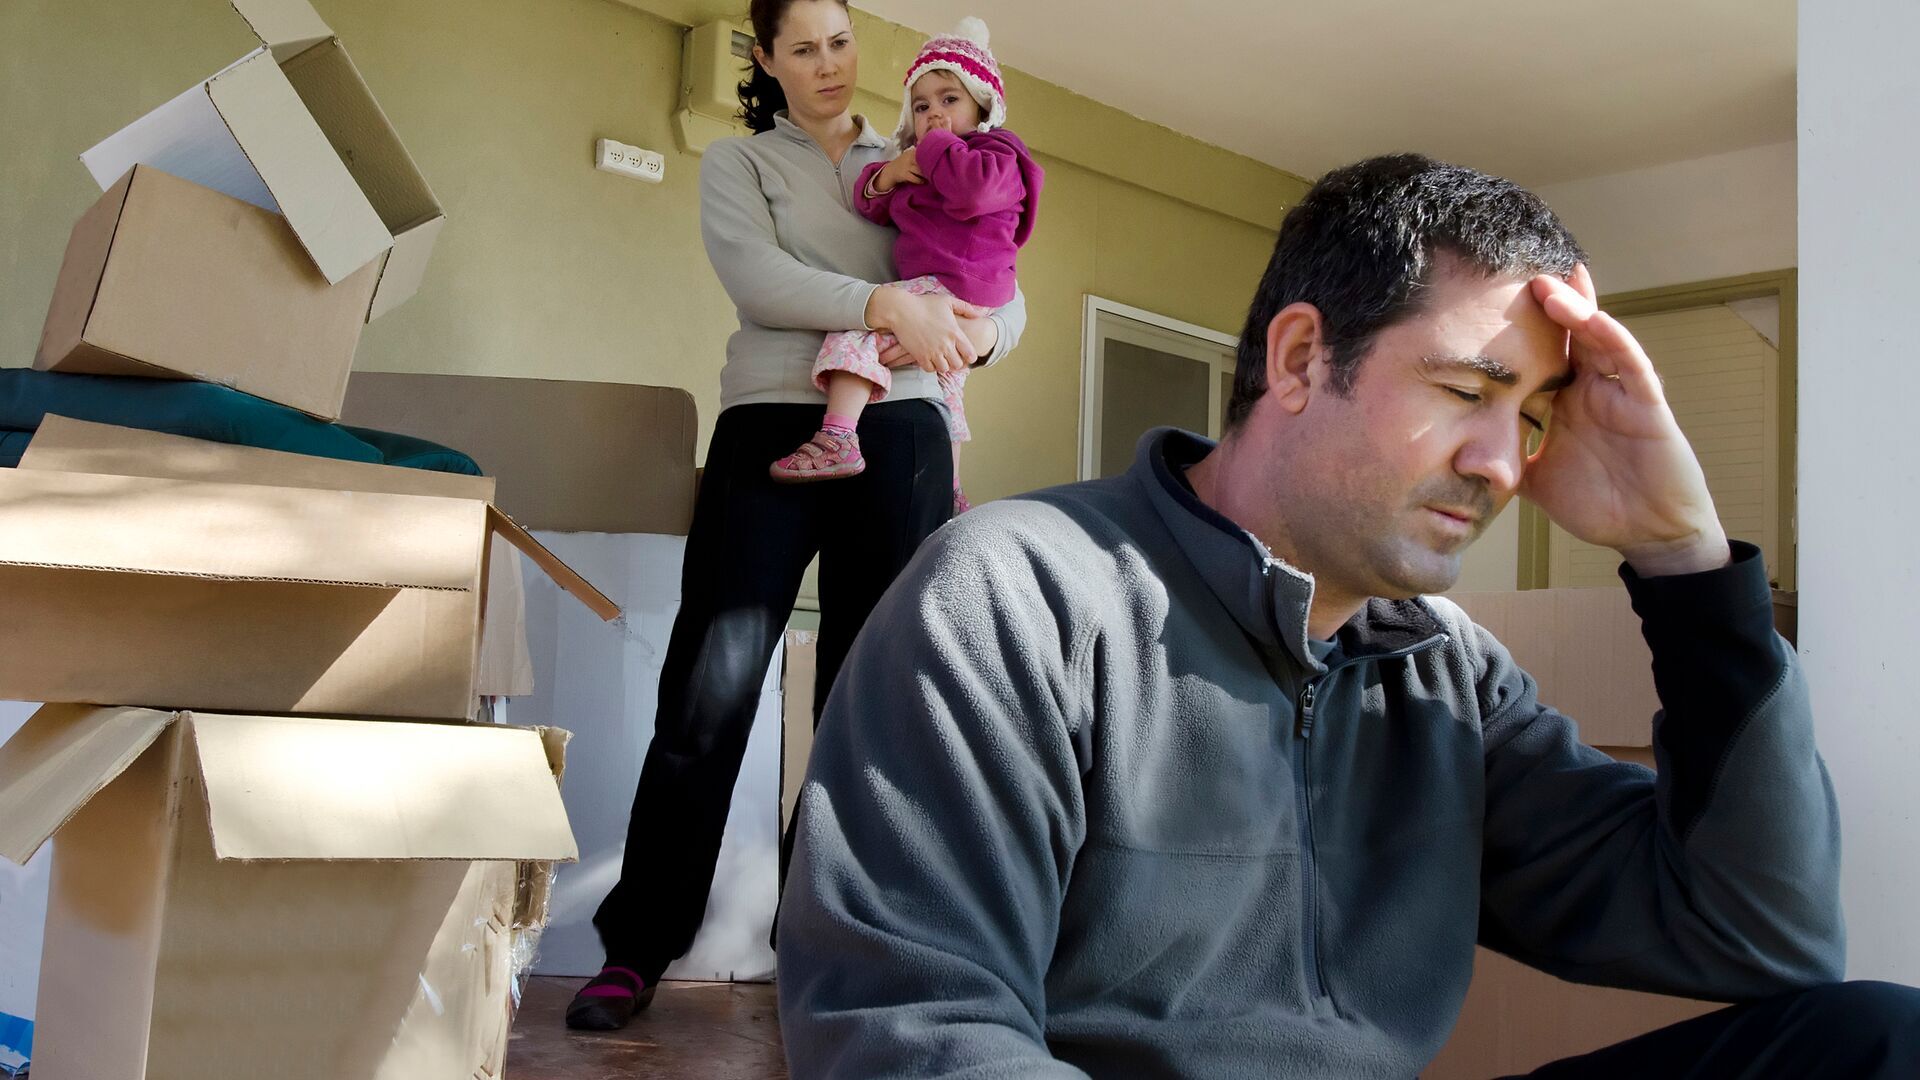 Stressed man sitting down as a woman holding a young child look on in a house being packed for a move.